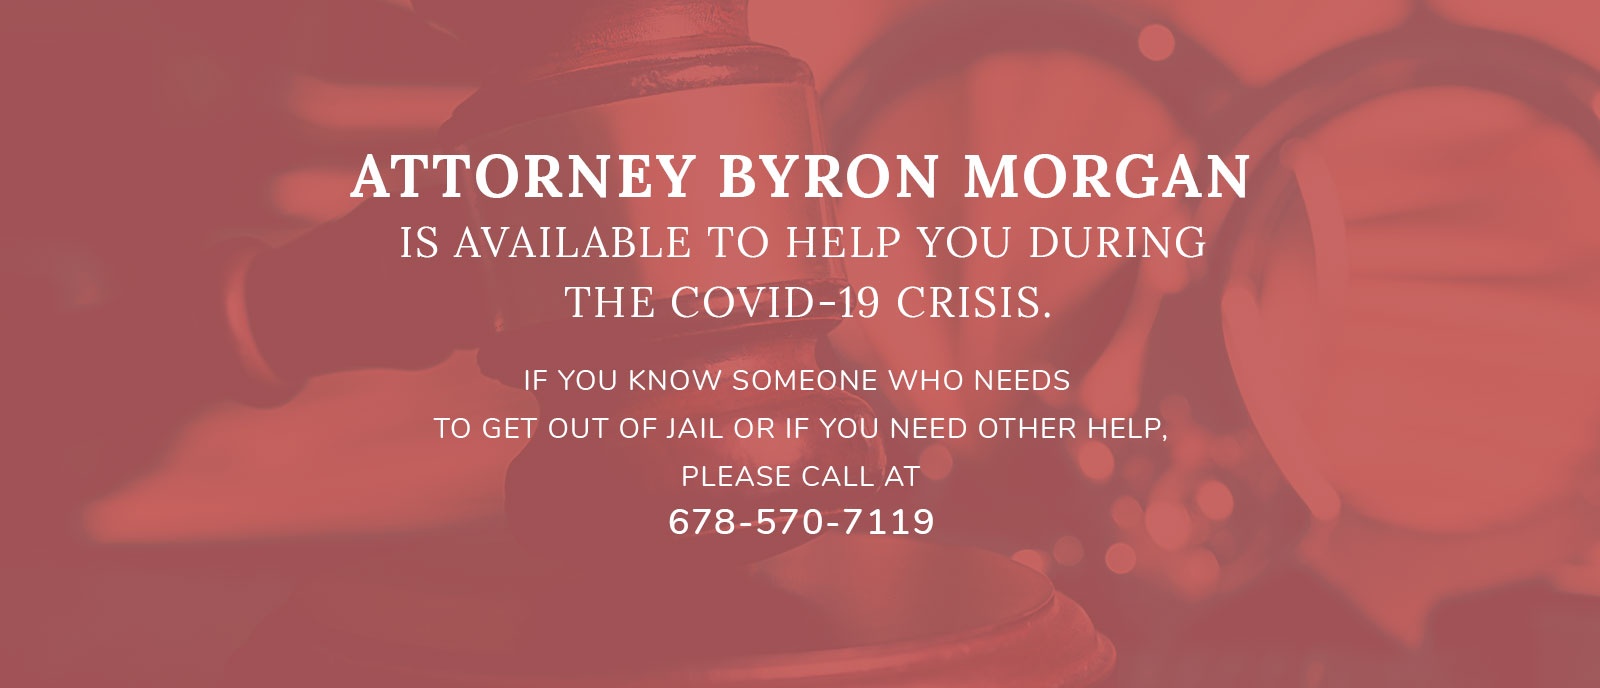 Attorney Byron Morgan is available to help you during the COVID19 crisi